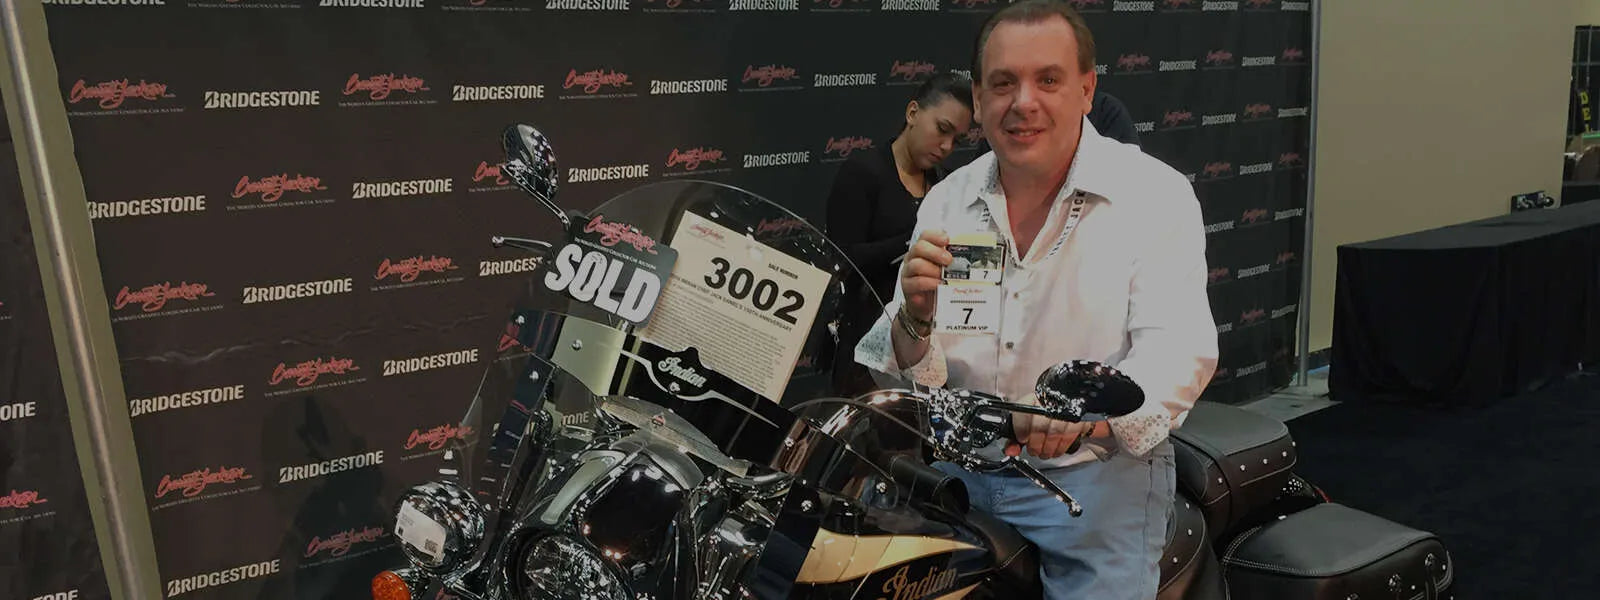 Jack Daniel's Indian Chief Vintage Brings 150K for Charity